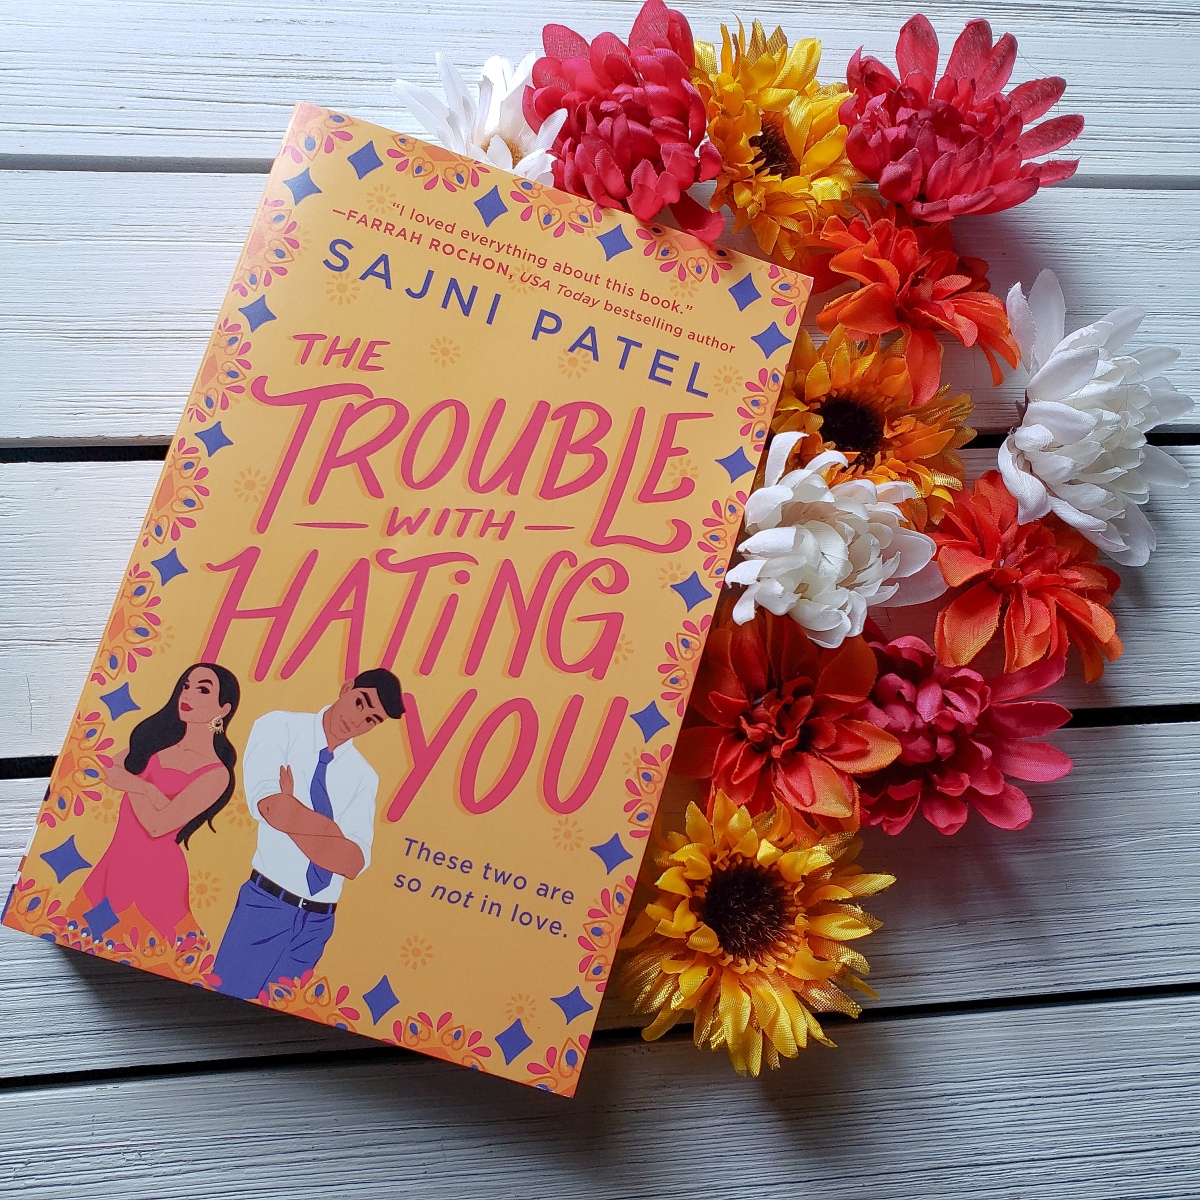 The Trouble with Hating You by Sajni Patel